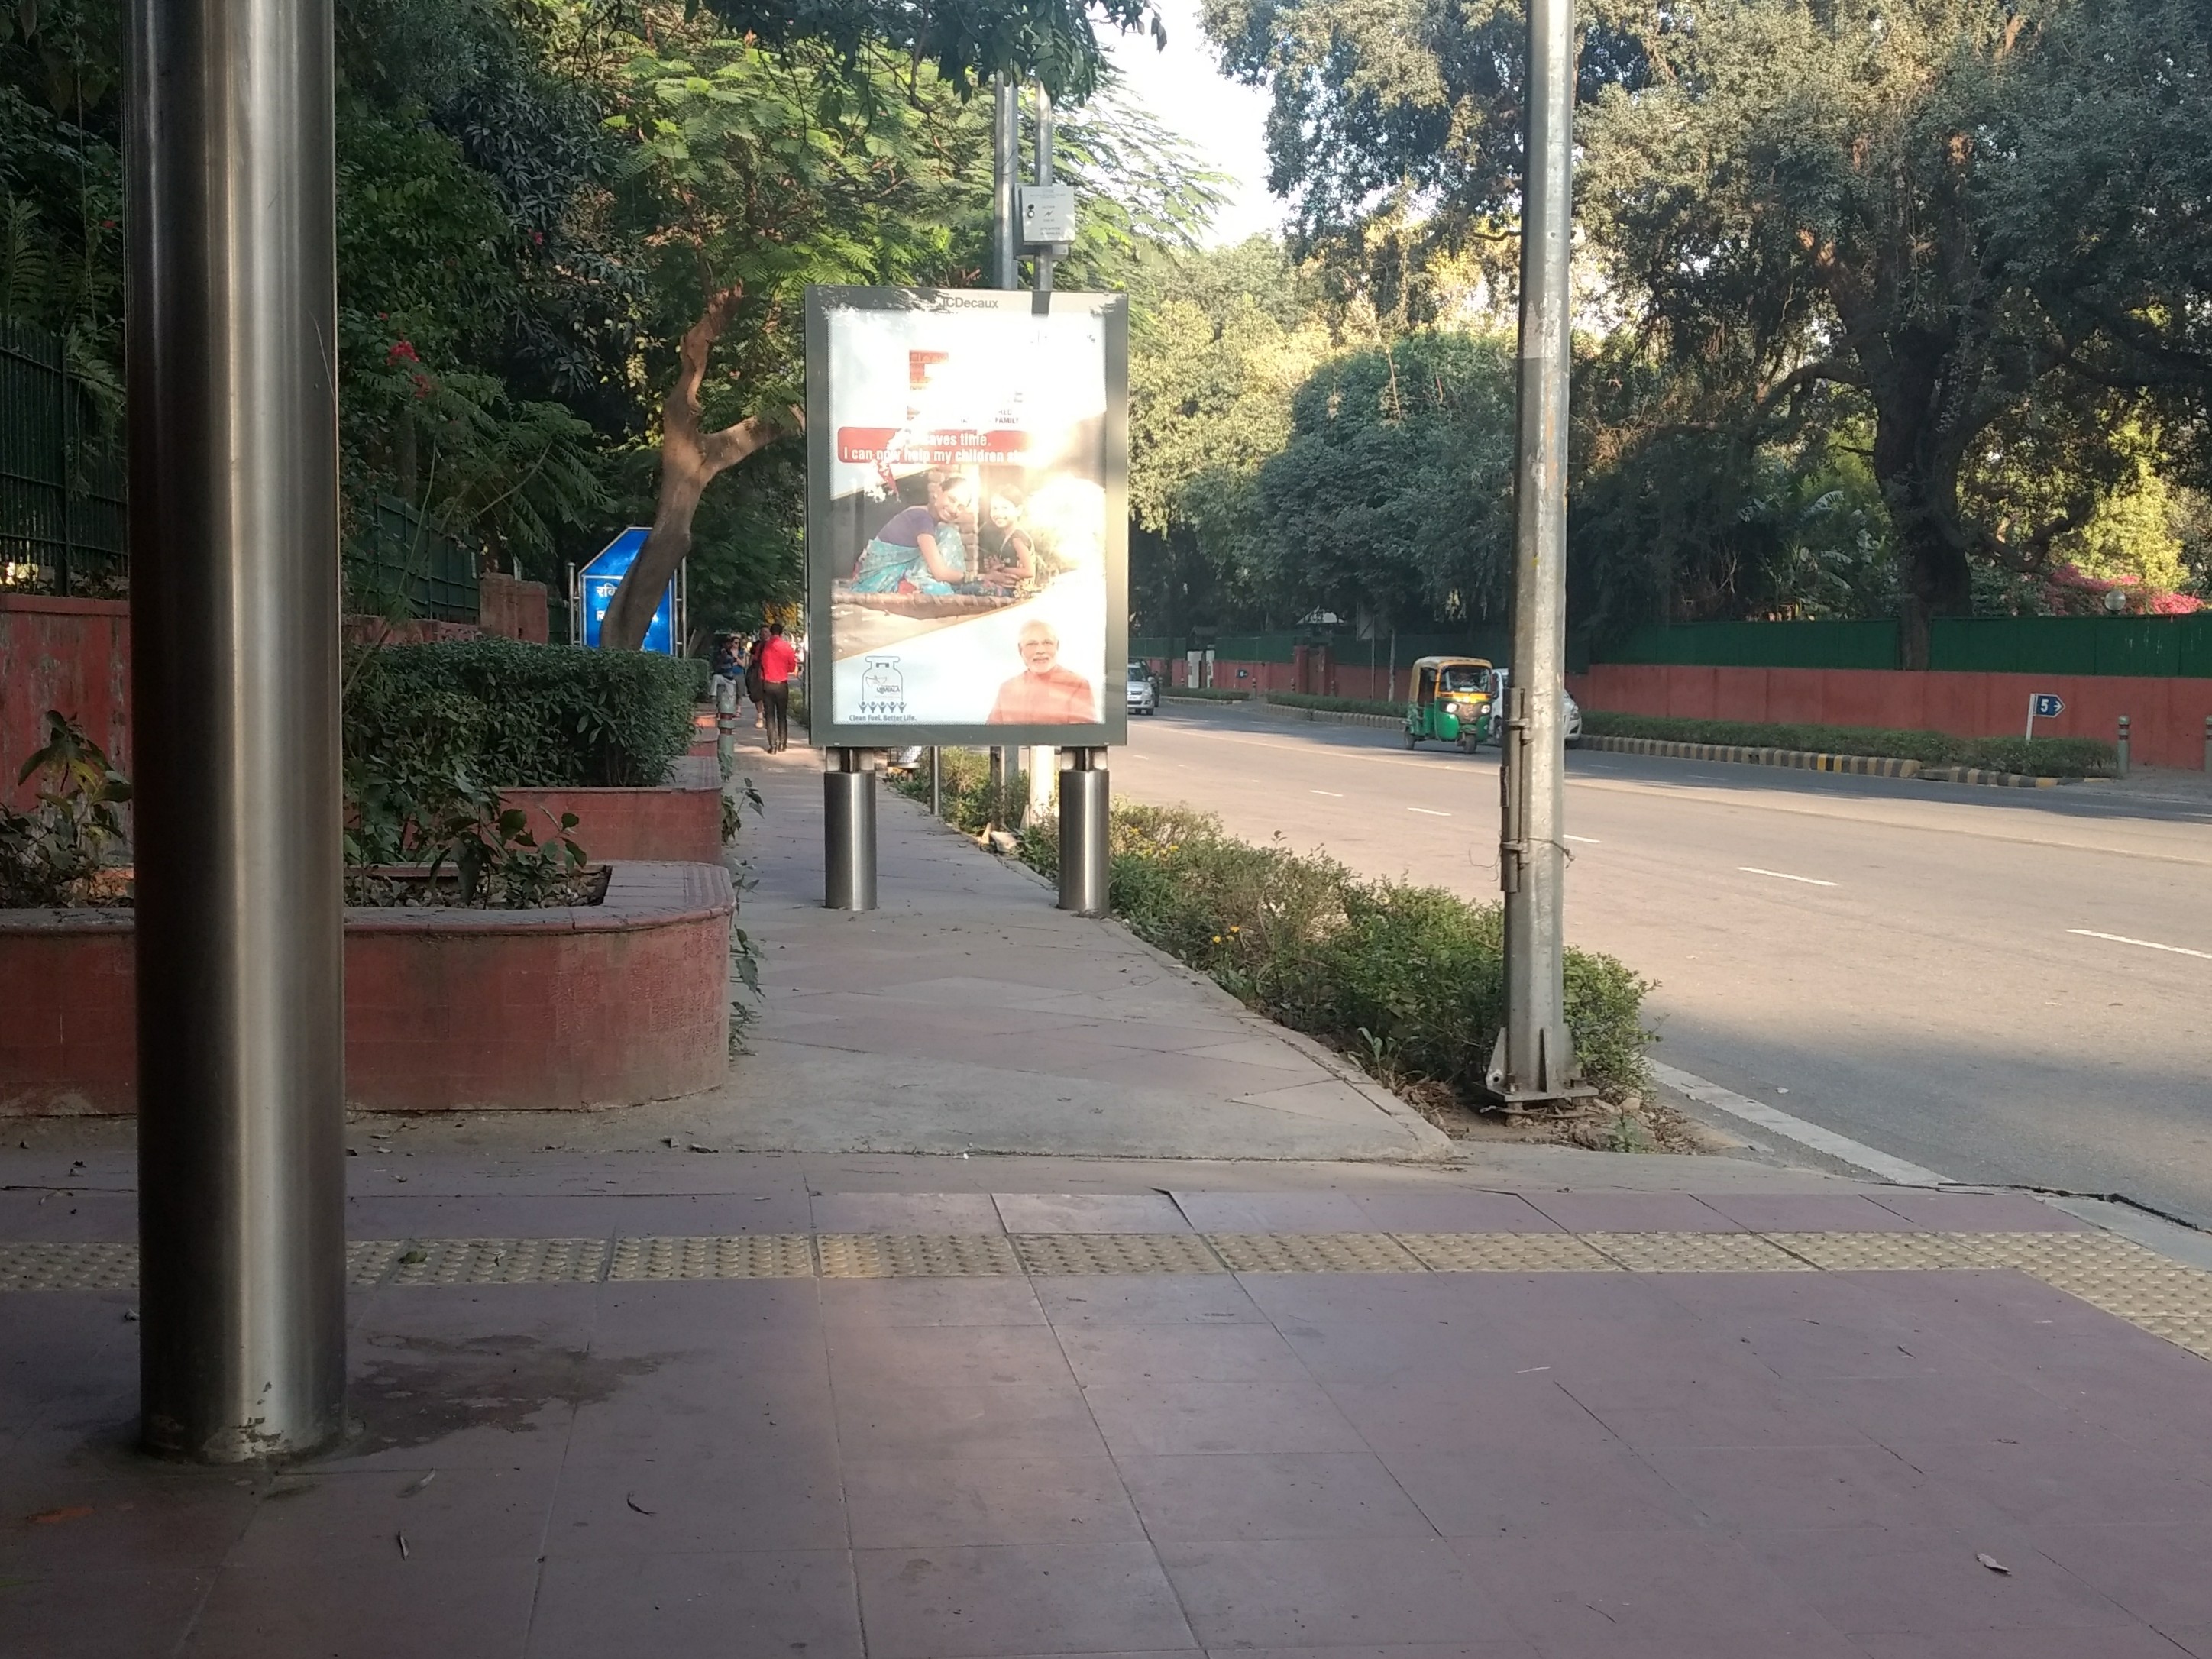 The national capital, Delhi, has buses and bus stops that are designed to be accessible to persons with disabilities. This bus shelter has ramps and tactile paving to help commuters who use wheelchairs or canes, but the kerb to reach it is permanently blocked by an advertisement. 